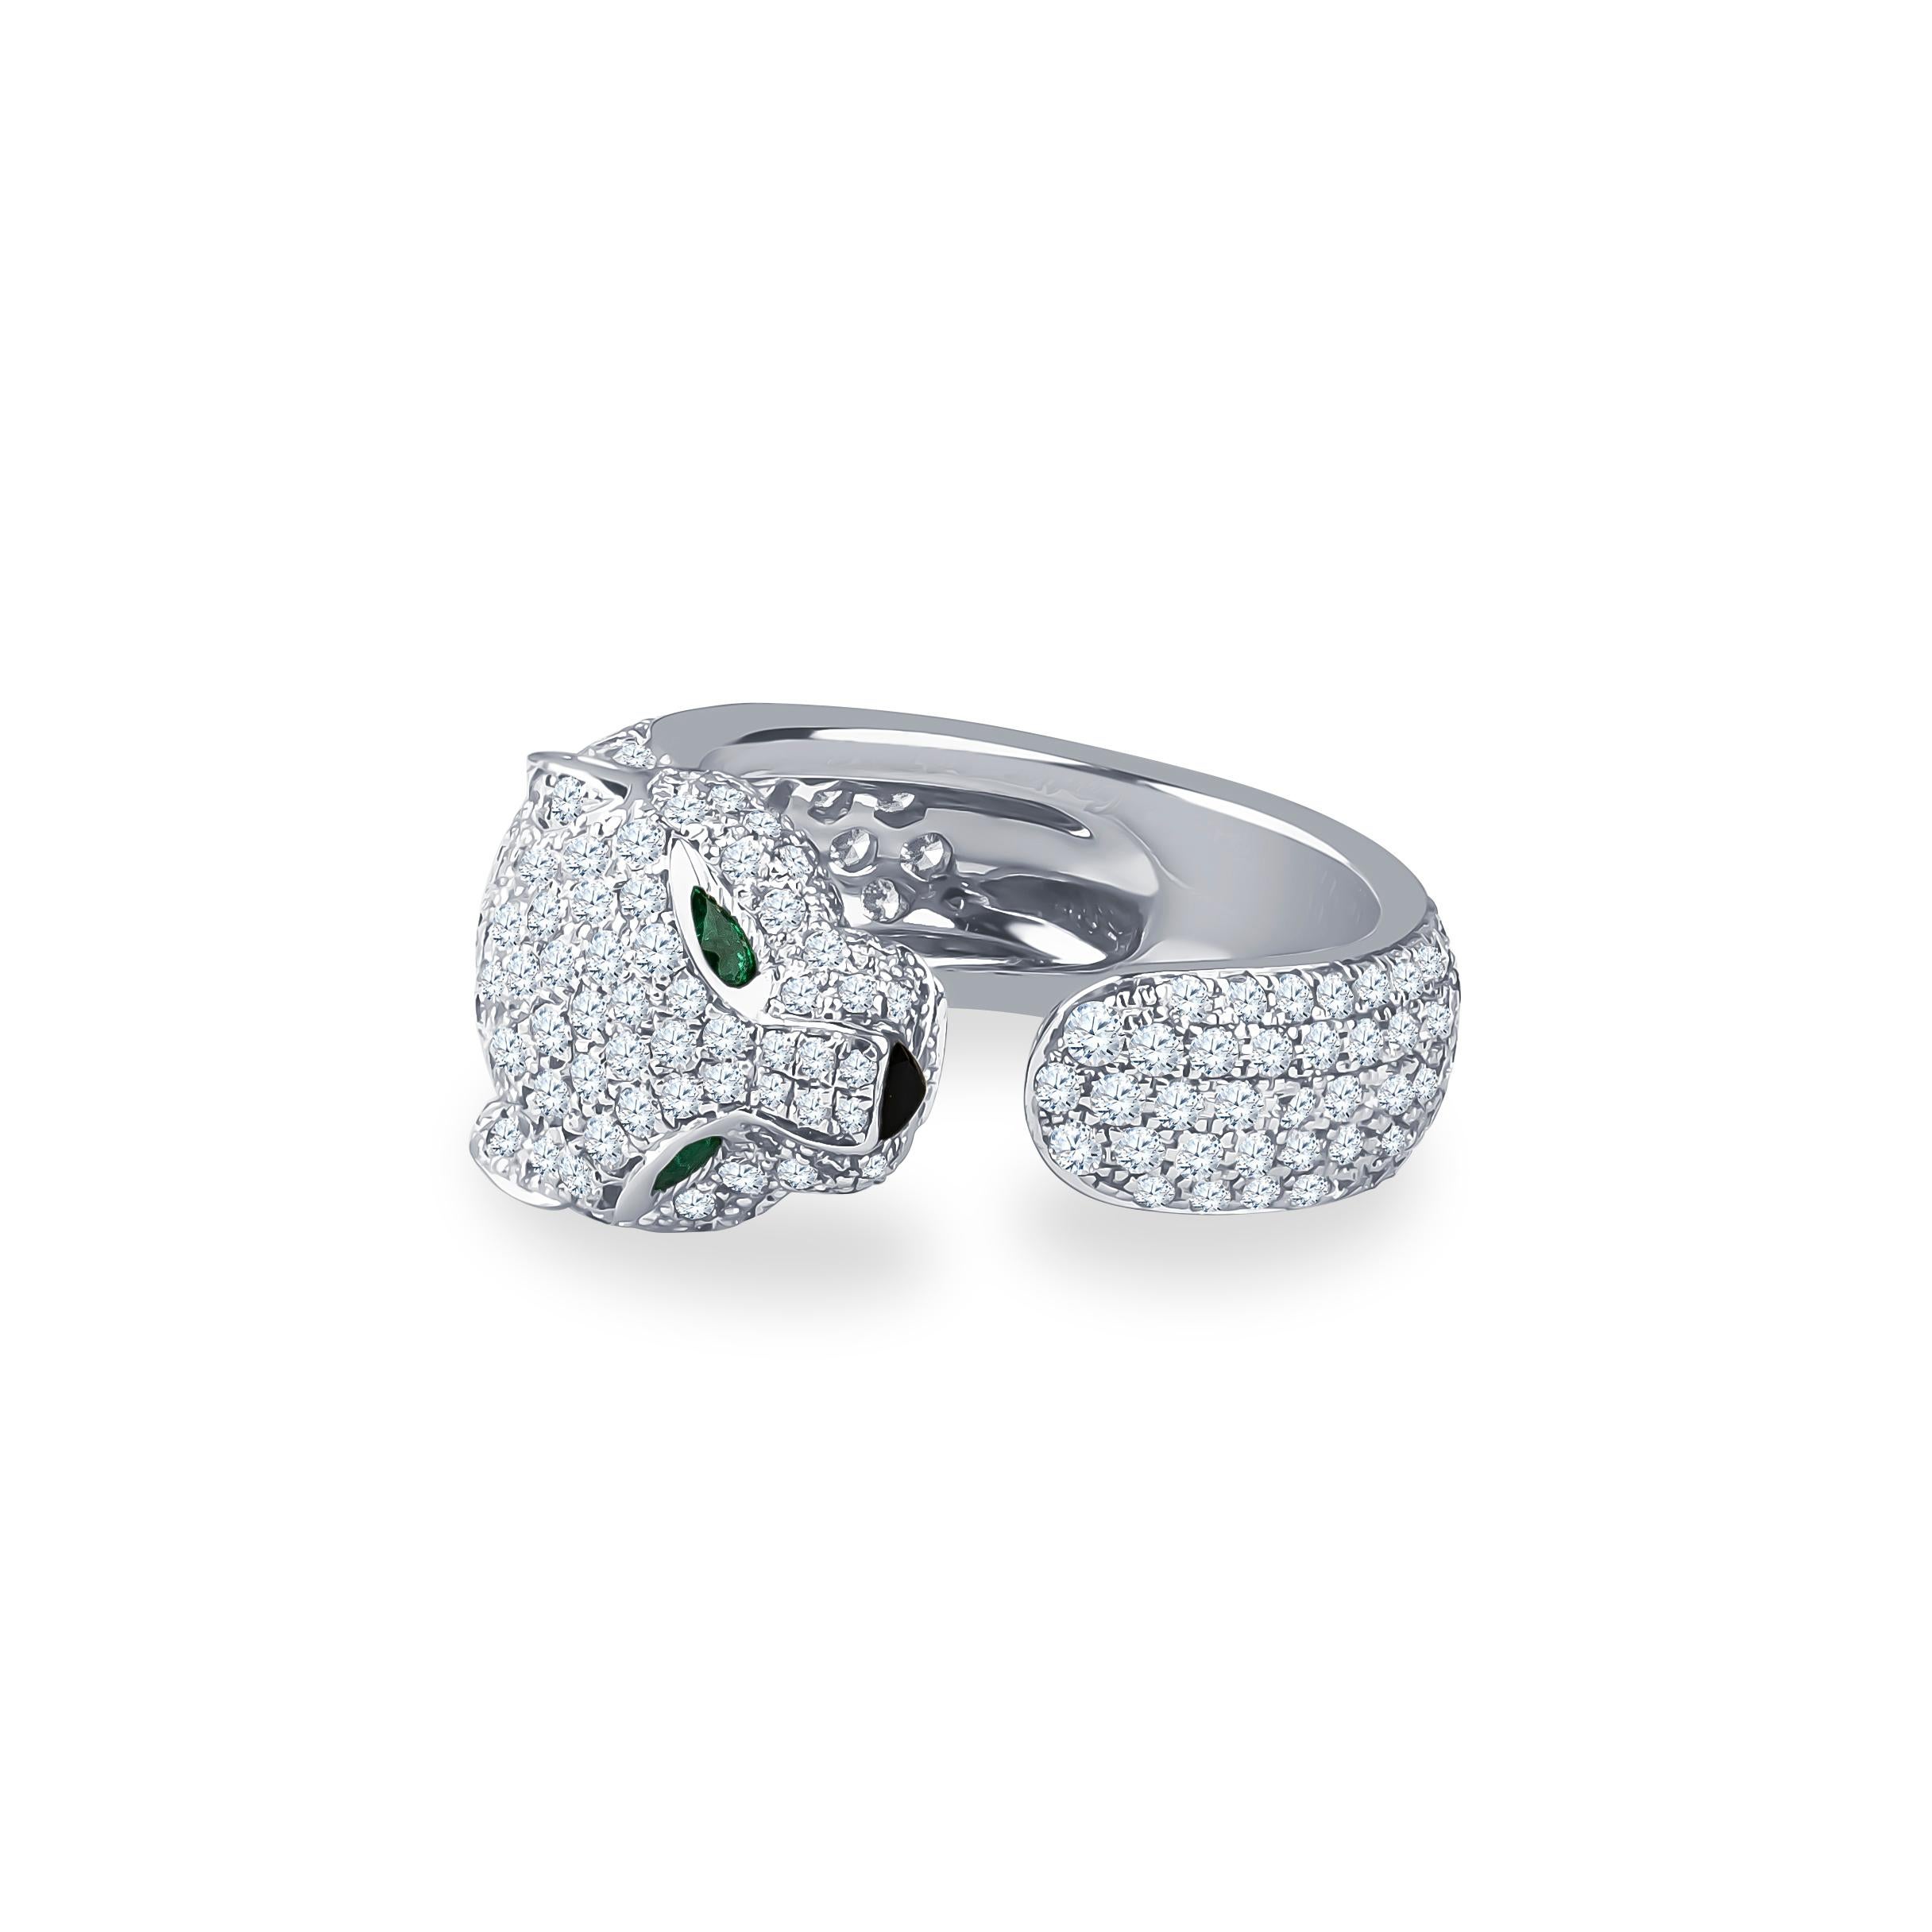 18K white gold, set with 285 diamonds totaling 2.39 carats, with emerald and onyx accents. Size 5.5 ring. The original box is included with purchase. The panther's head is 10mm in width and 6mm high; the tail of the ring is 6mm in width